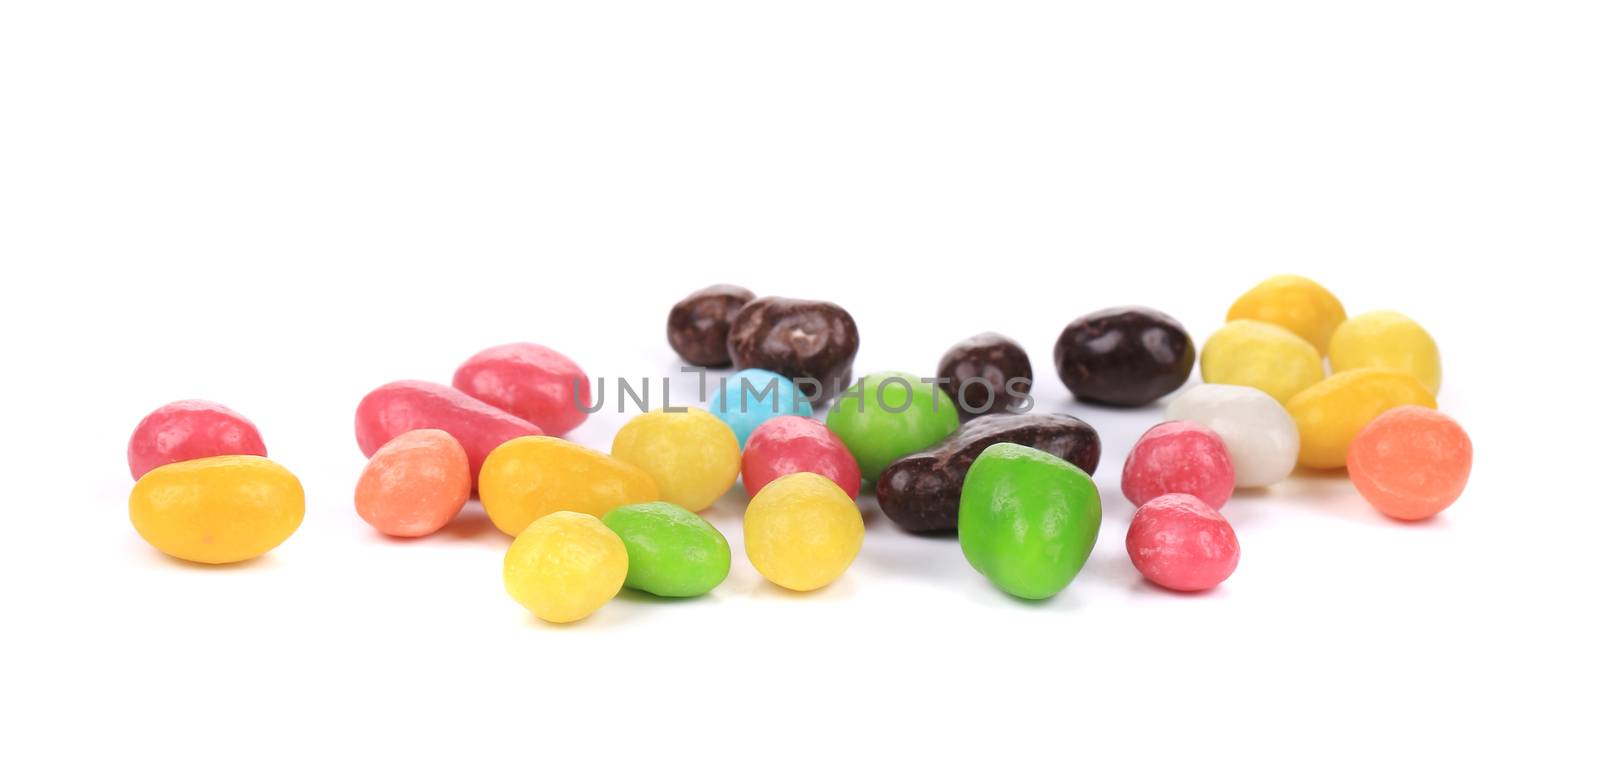 Heap of sweet colorful glaze candies. Isolated on a white background.